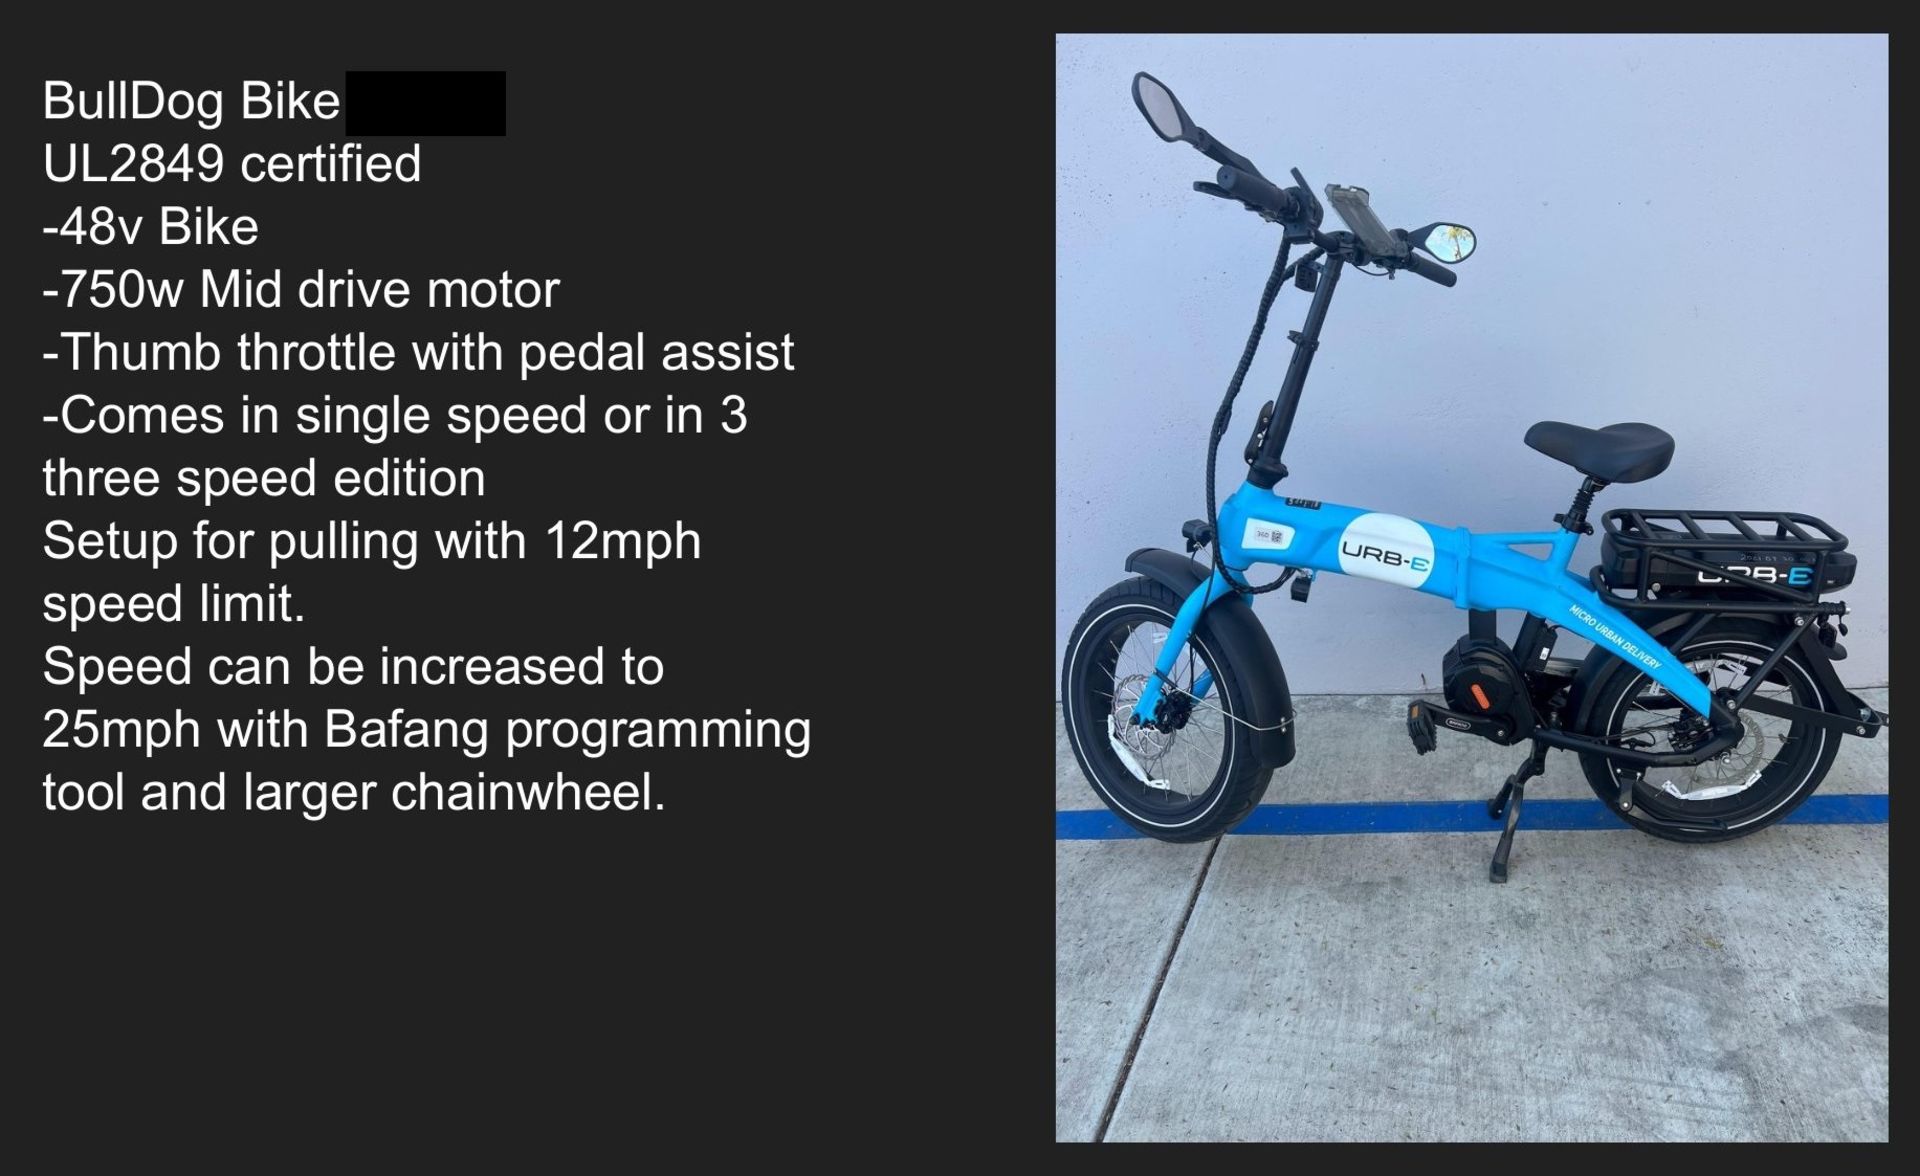 URB-E ELECTRIC DELIVERY BIKE, USED, 750W MID DRIVE MOTOR, SINGLE SPEED, THUMB THROTTLE WITH PEDAL - Bild 3 aus 3